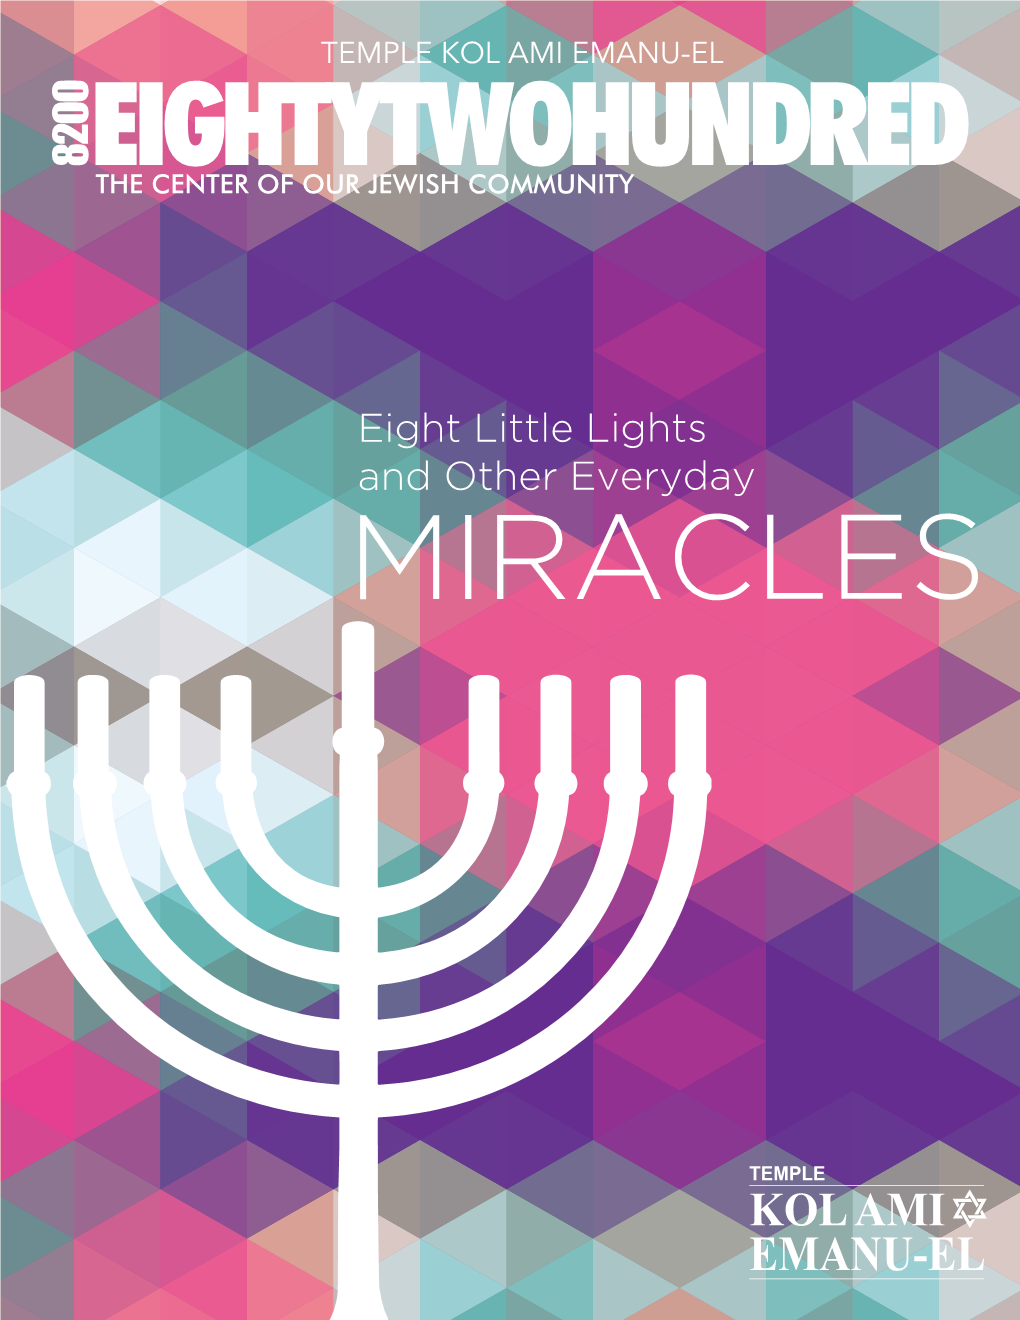 Eight Little Lights and Other Everyday MIRACLES